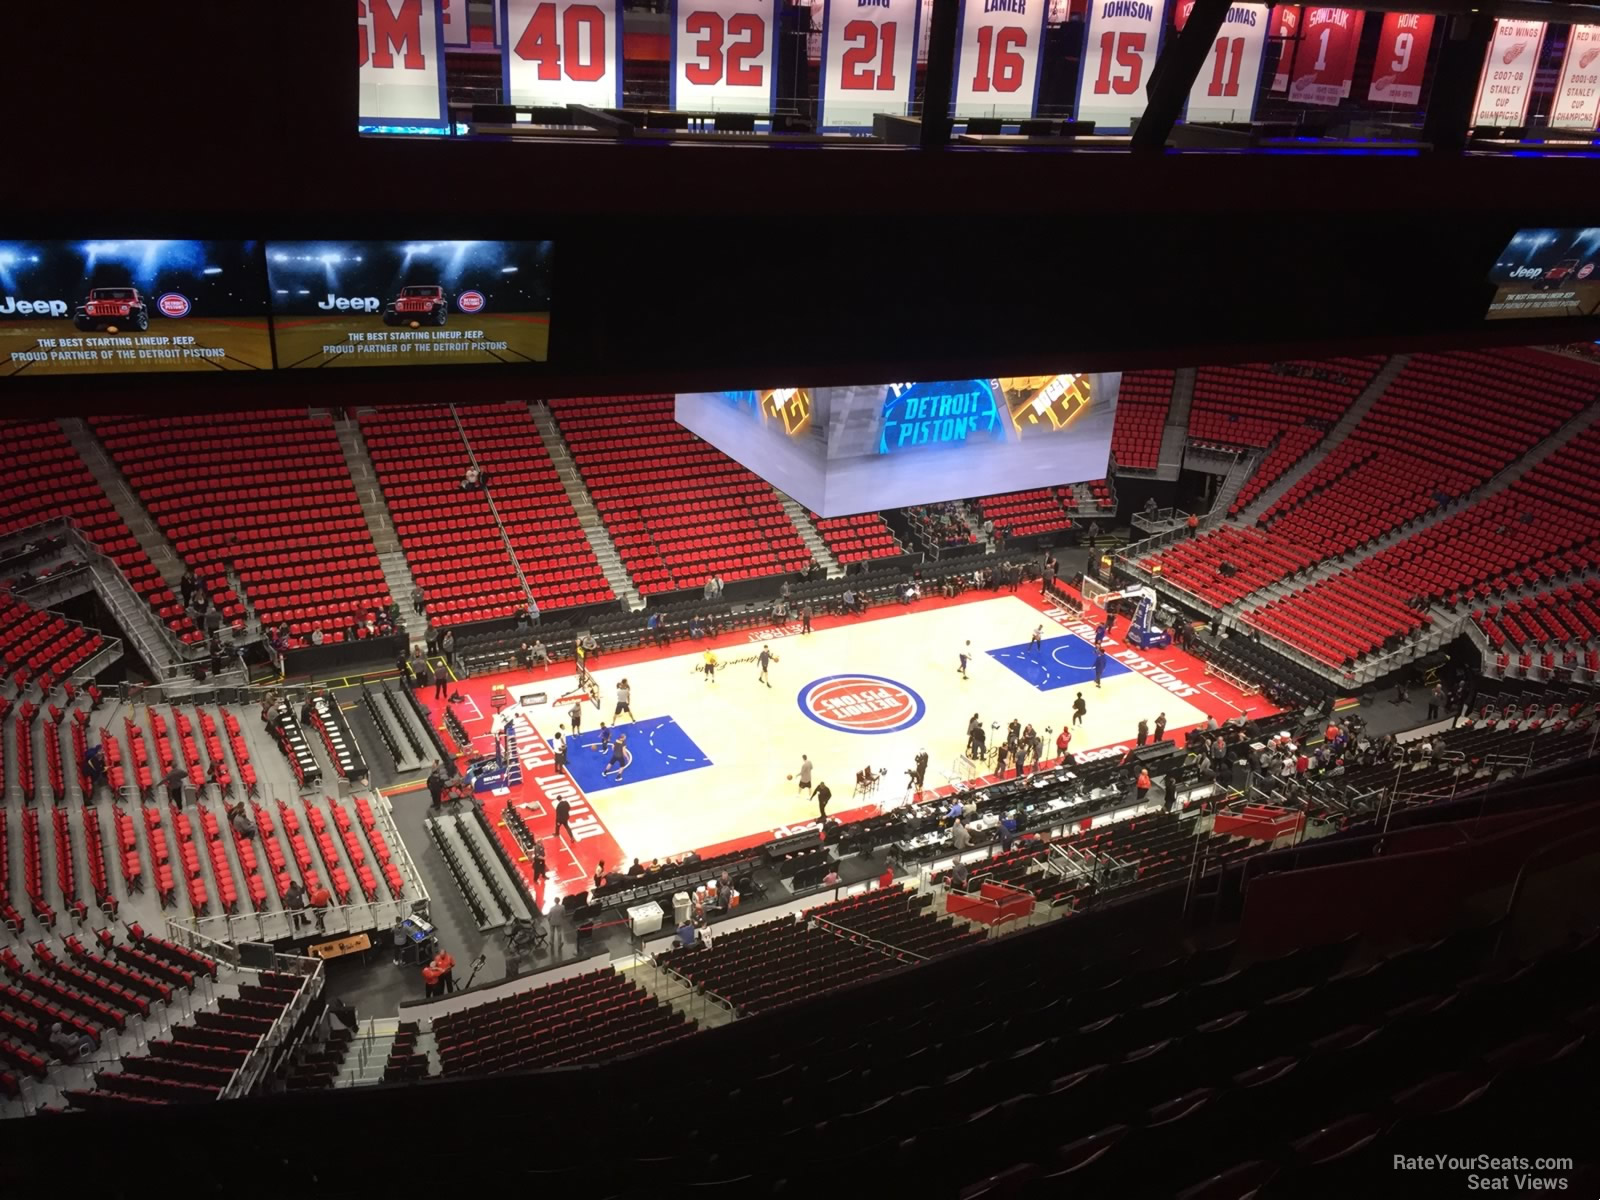 section 230, row 11 seat view  for basketball - little caesars arena